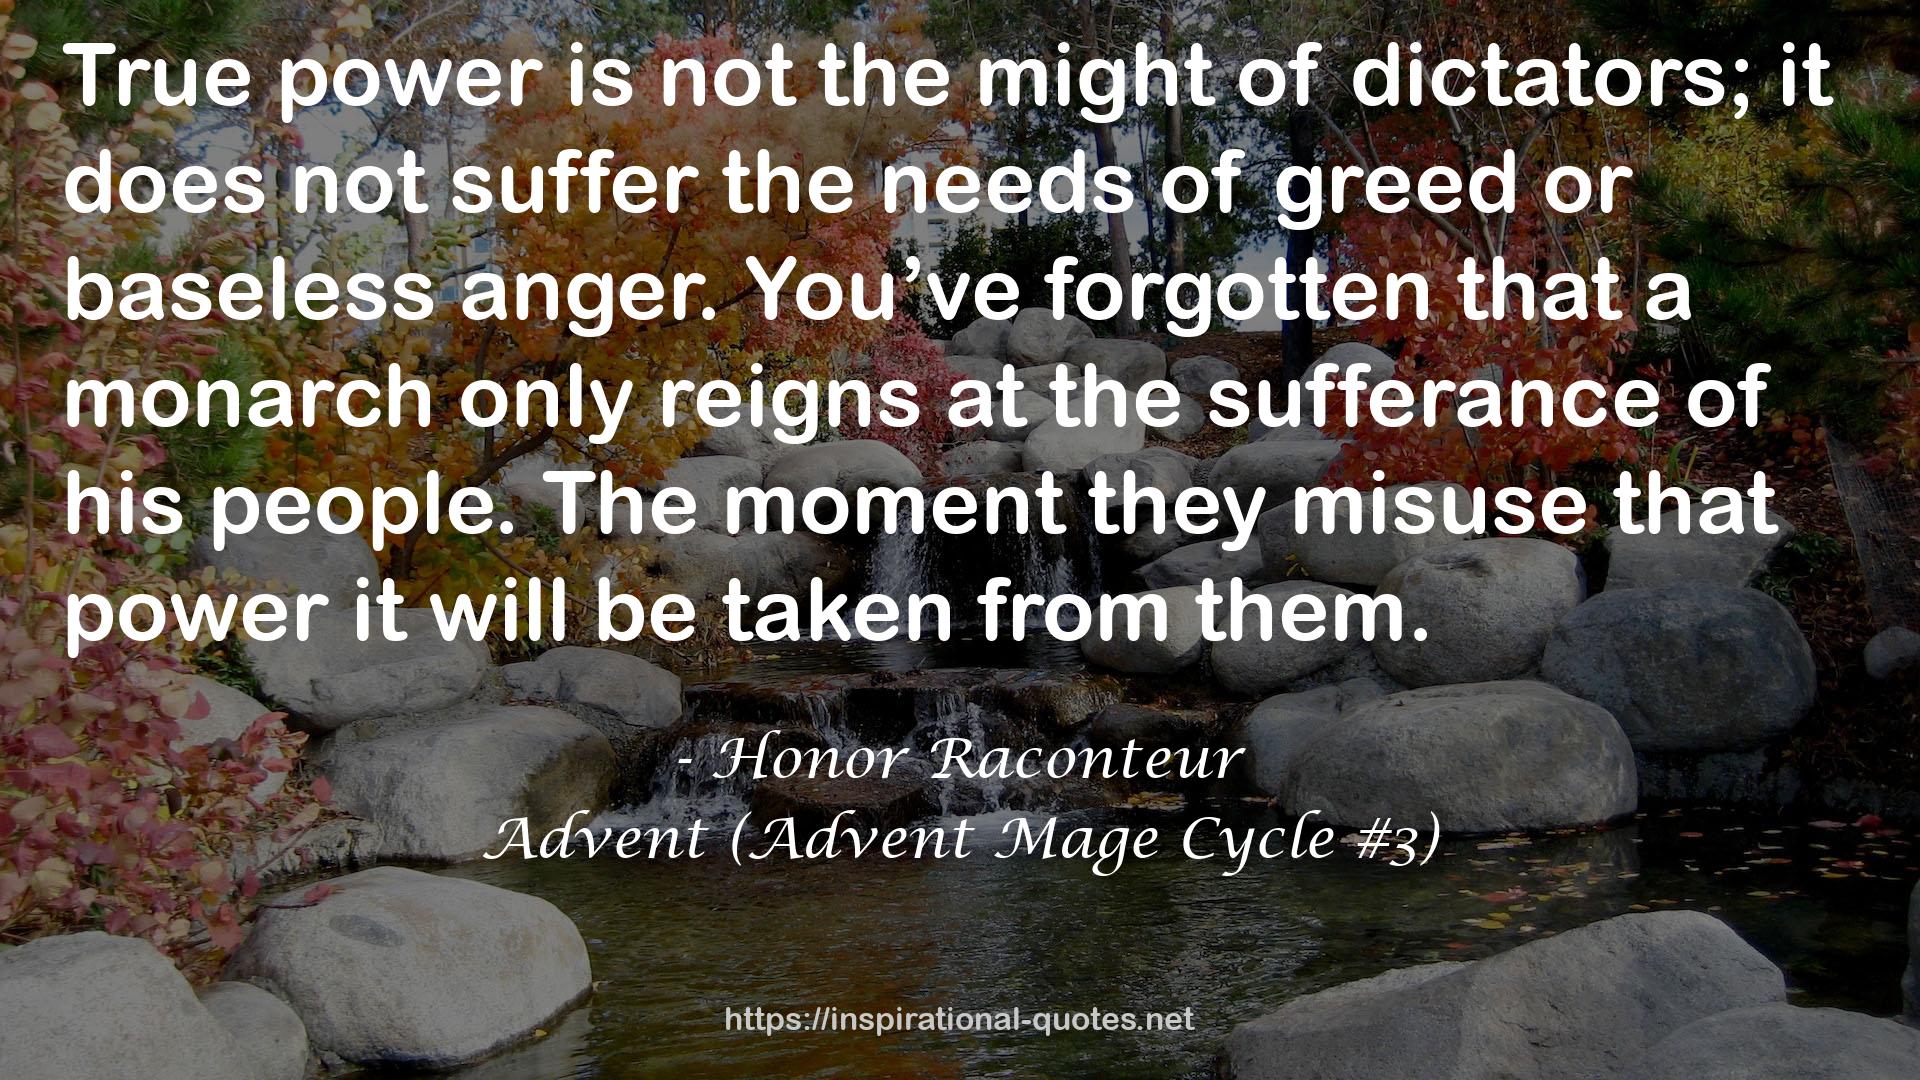 Advent (Advent Mage Cycle #3) QUOTES